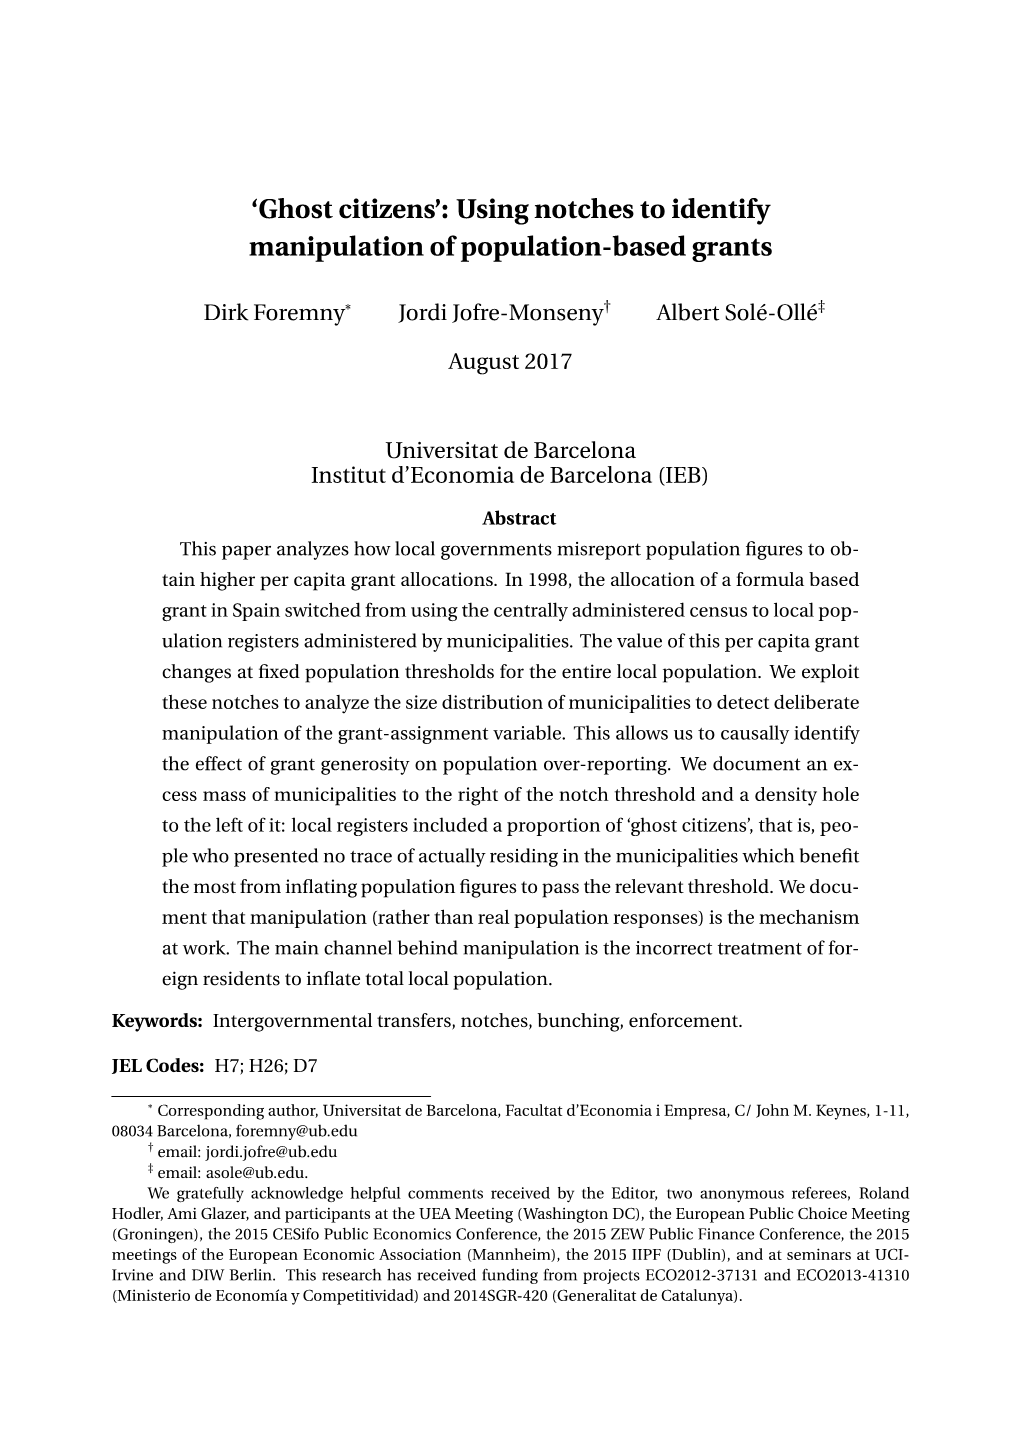 Ghost Citizens’: Using Notches to Identify Manipulation of Population-Based Grants